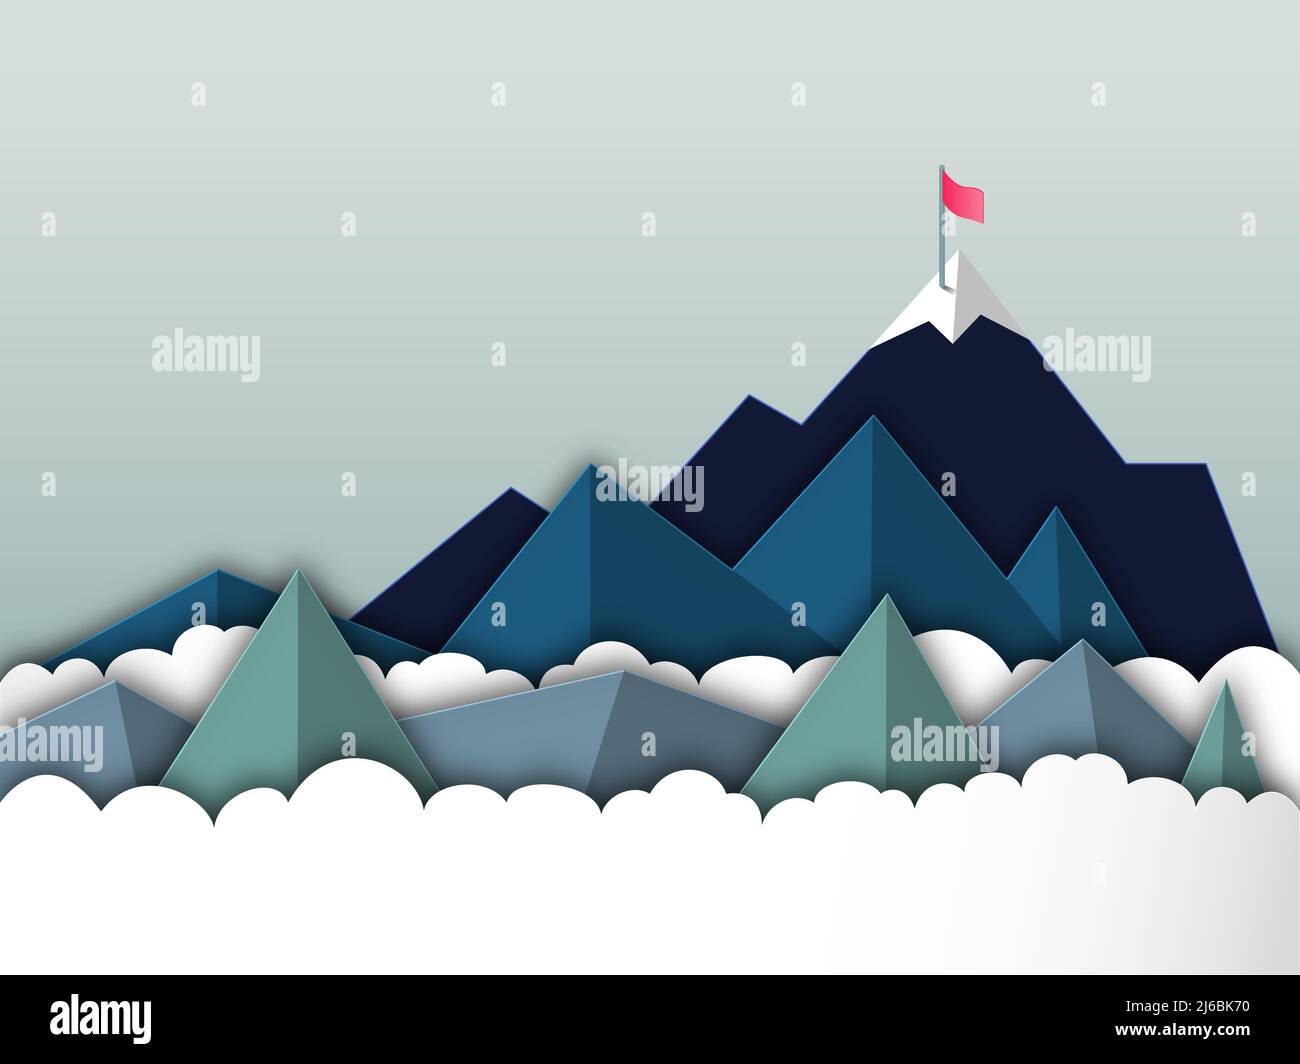 Paper cut style vector illustration of mountain peak with red flag. Concept of business success and achievement. Background illustration in blue and g Stock Vector